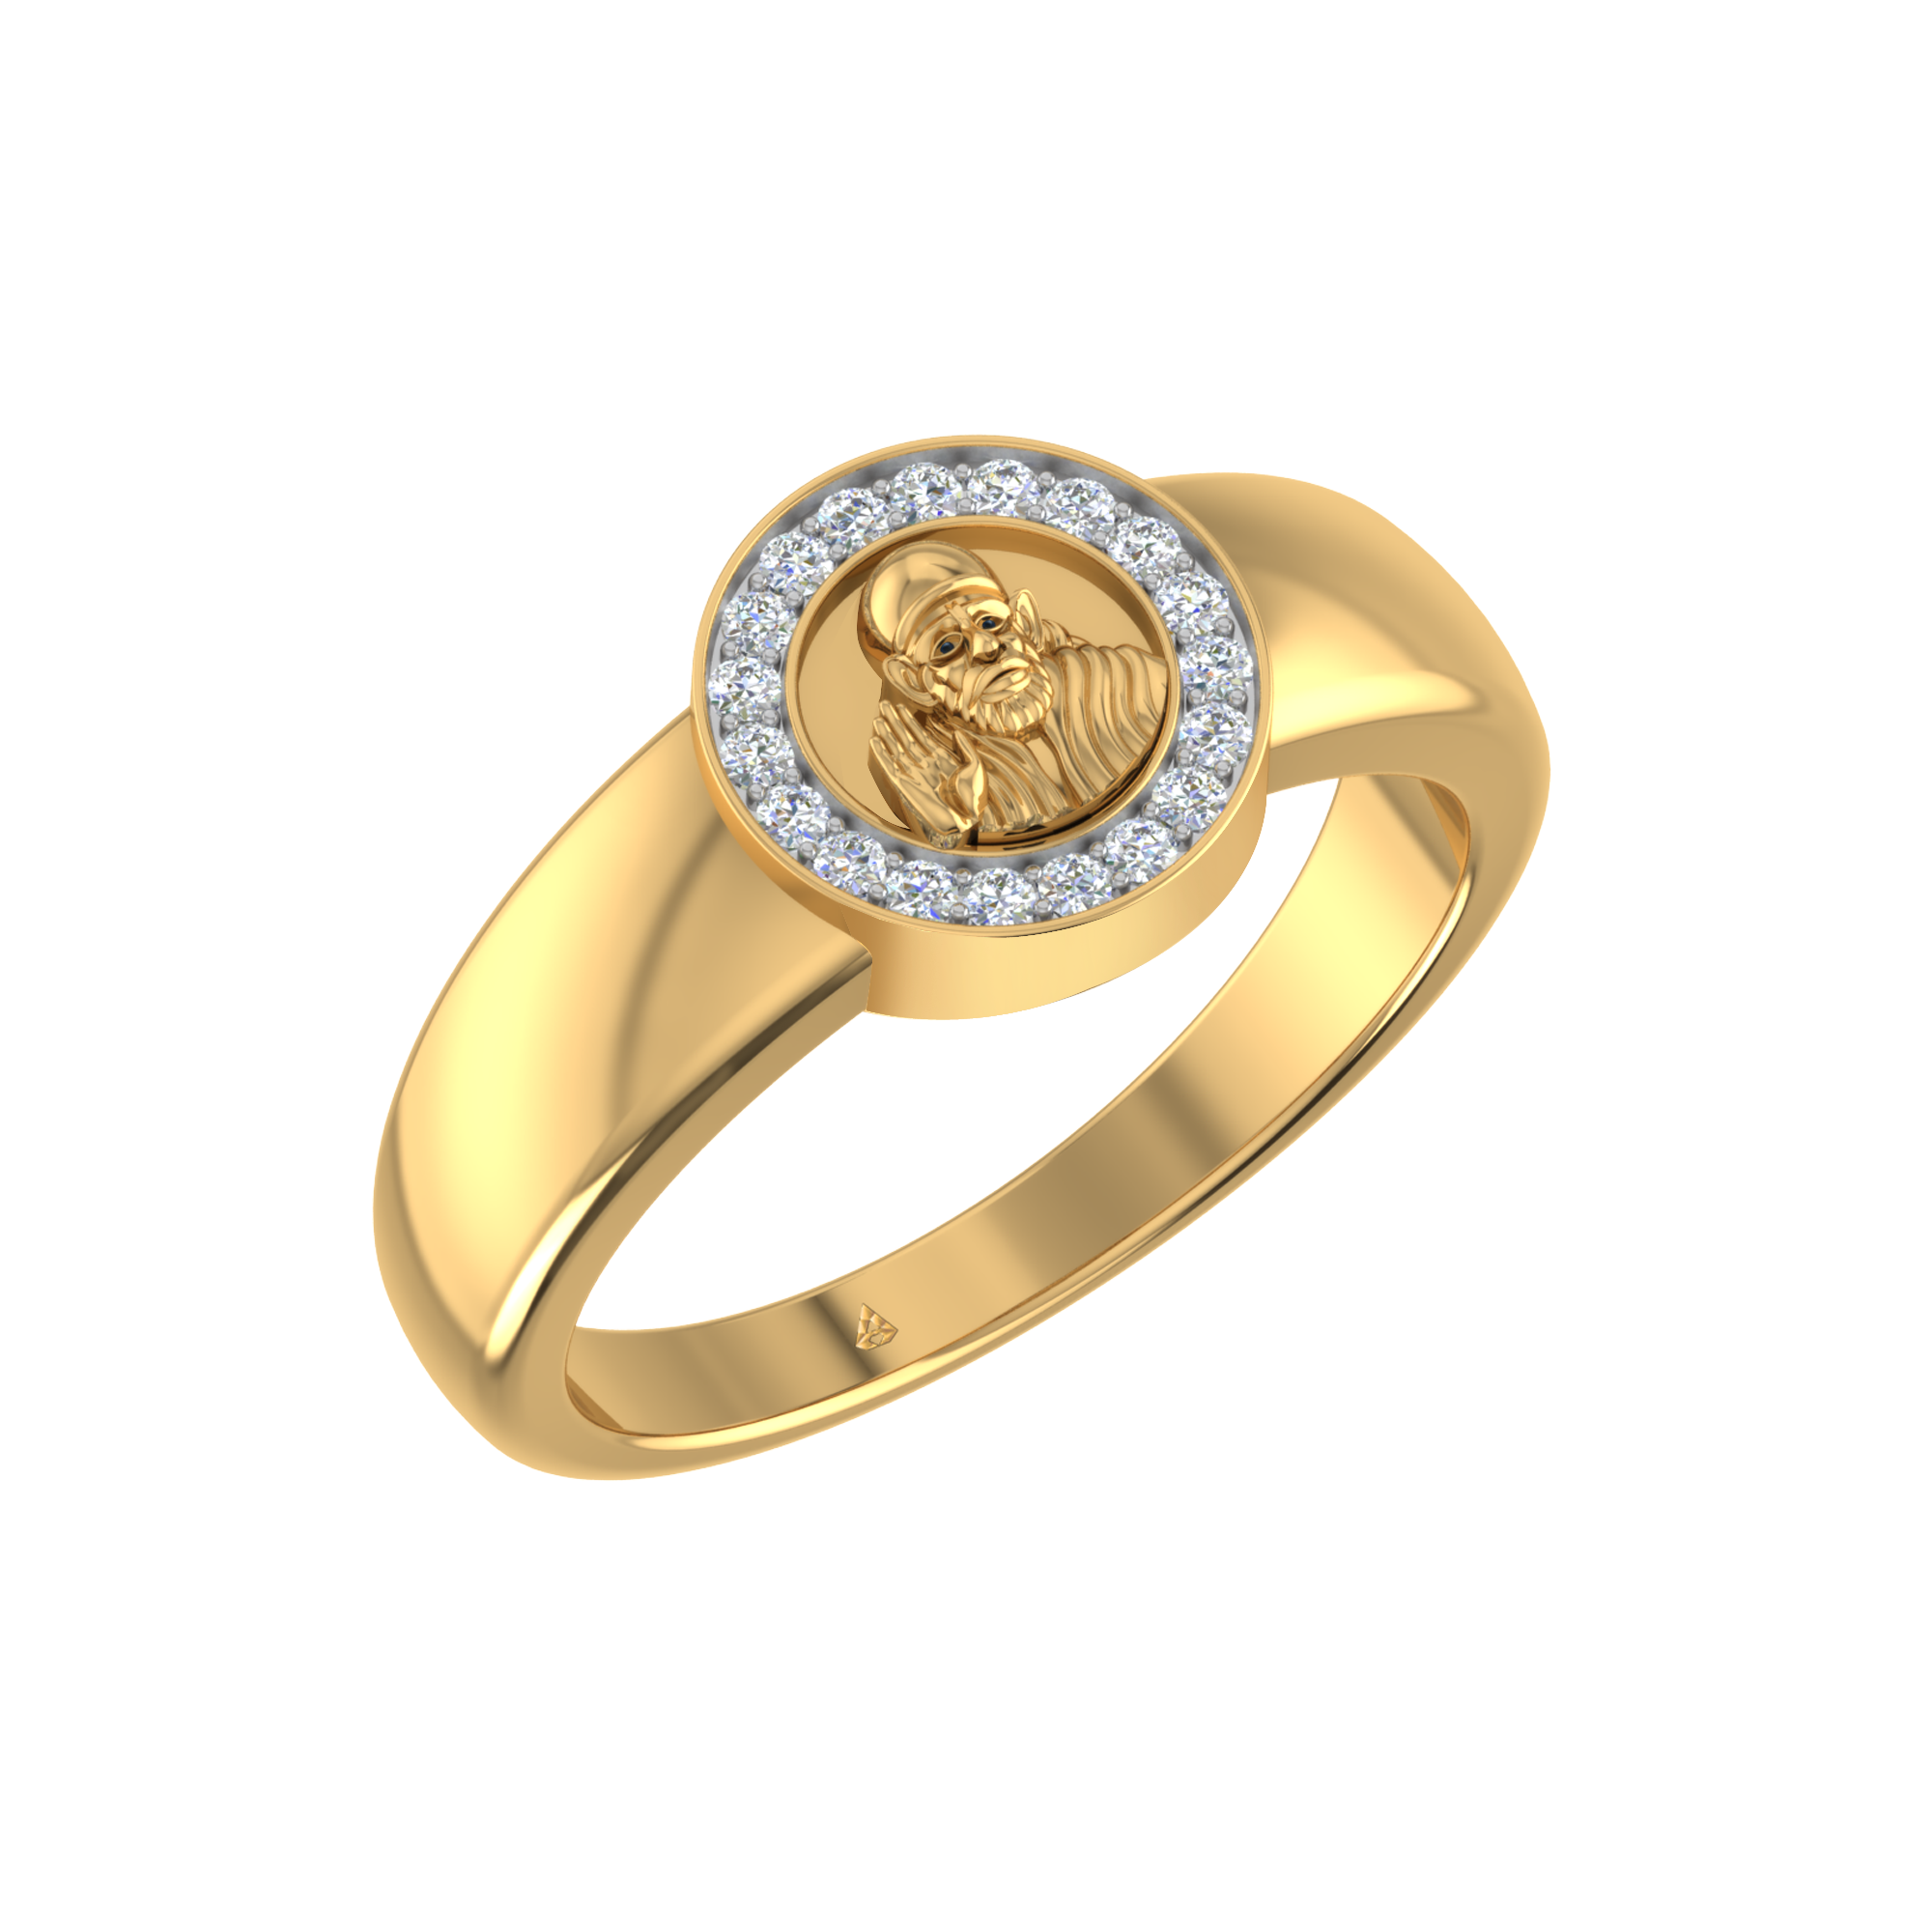 Buy 22K Gold Temple Lord Saibaba Ring 569VA4 Online from Vaibhav Jewellers